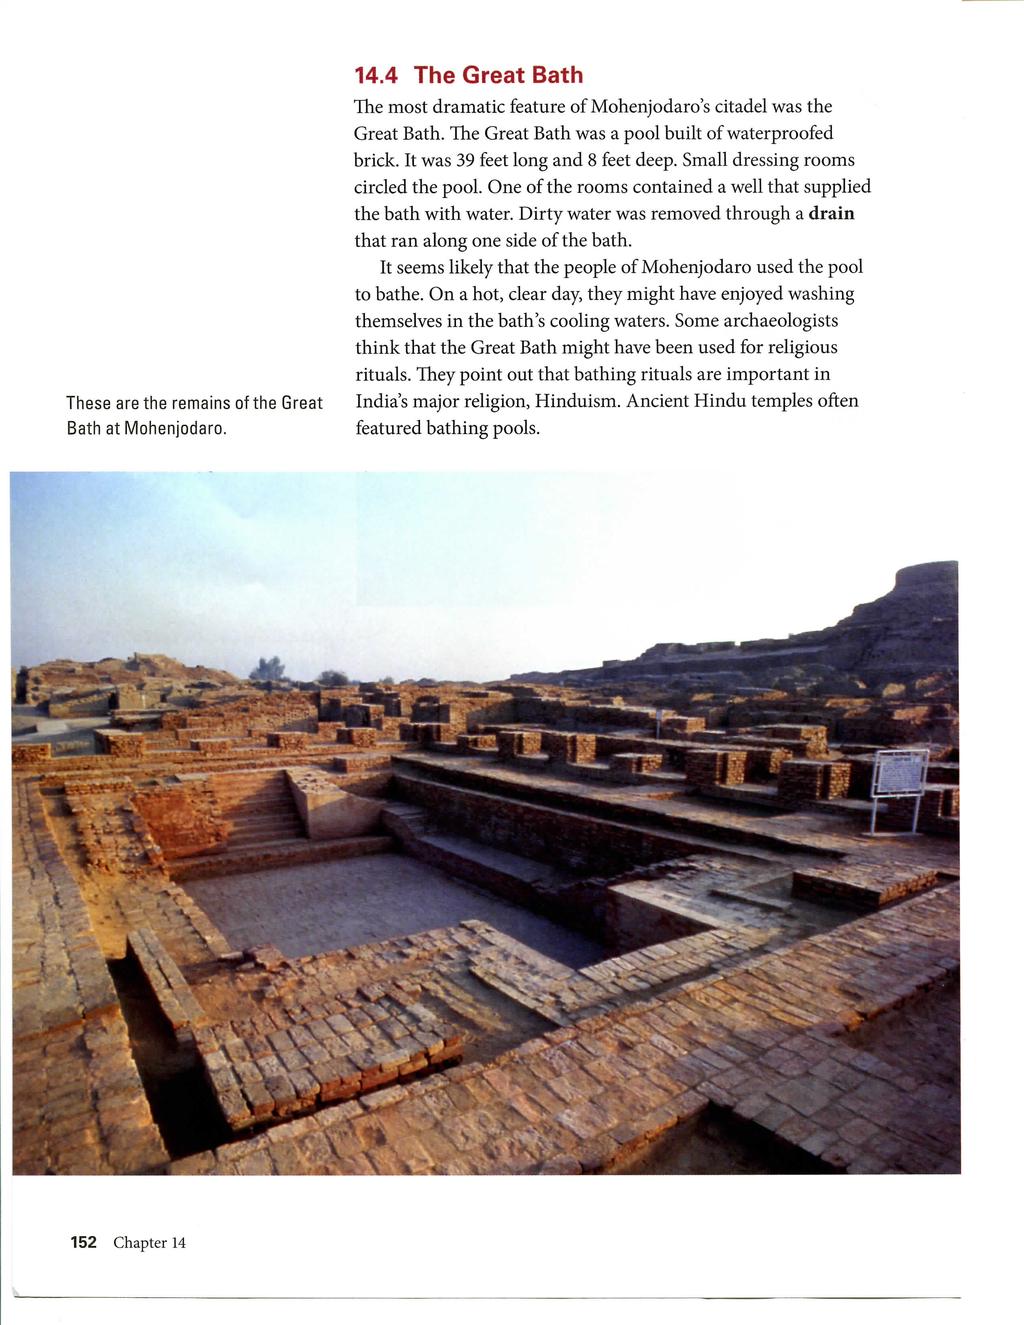 These are the remains of the Great Bath at Mohenjodaro. 14.4 The Great Bath The most dramatic feature of Mohenjodaro's citadel was the Great Bath.